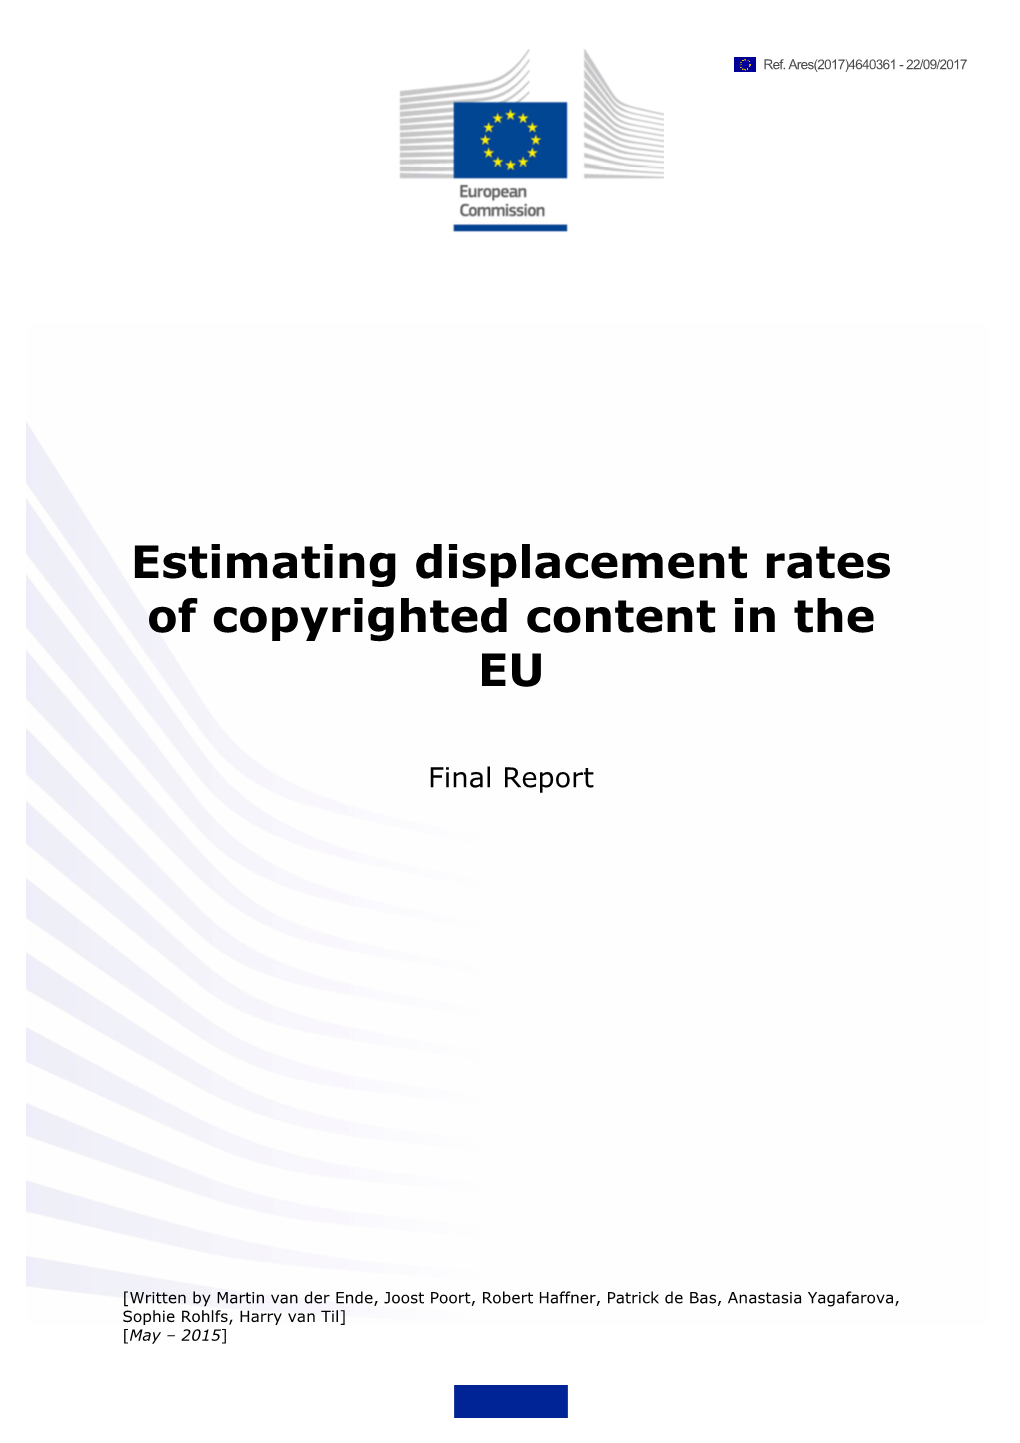 Estimating Displacement Rates of Copyrighted Content in the EU